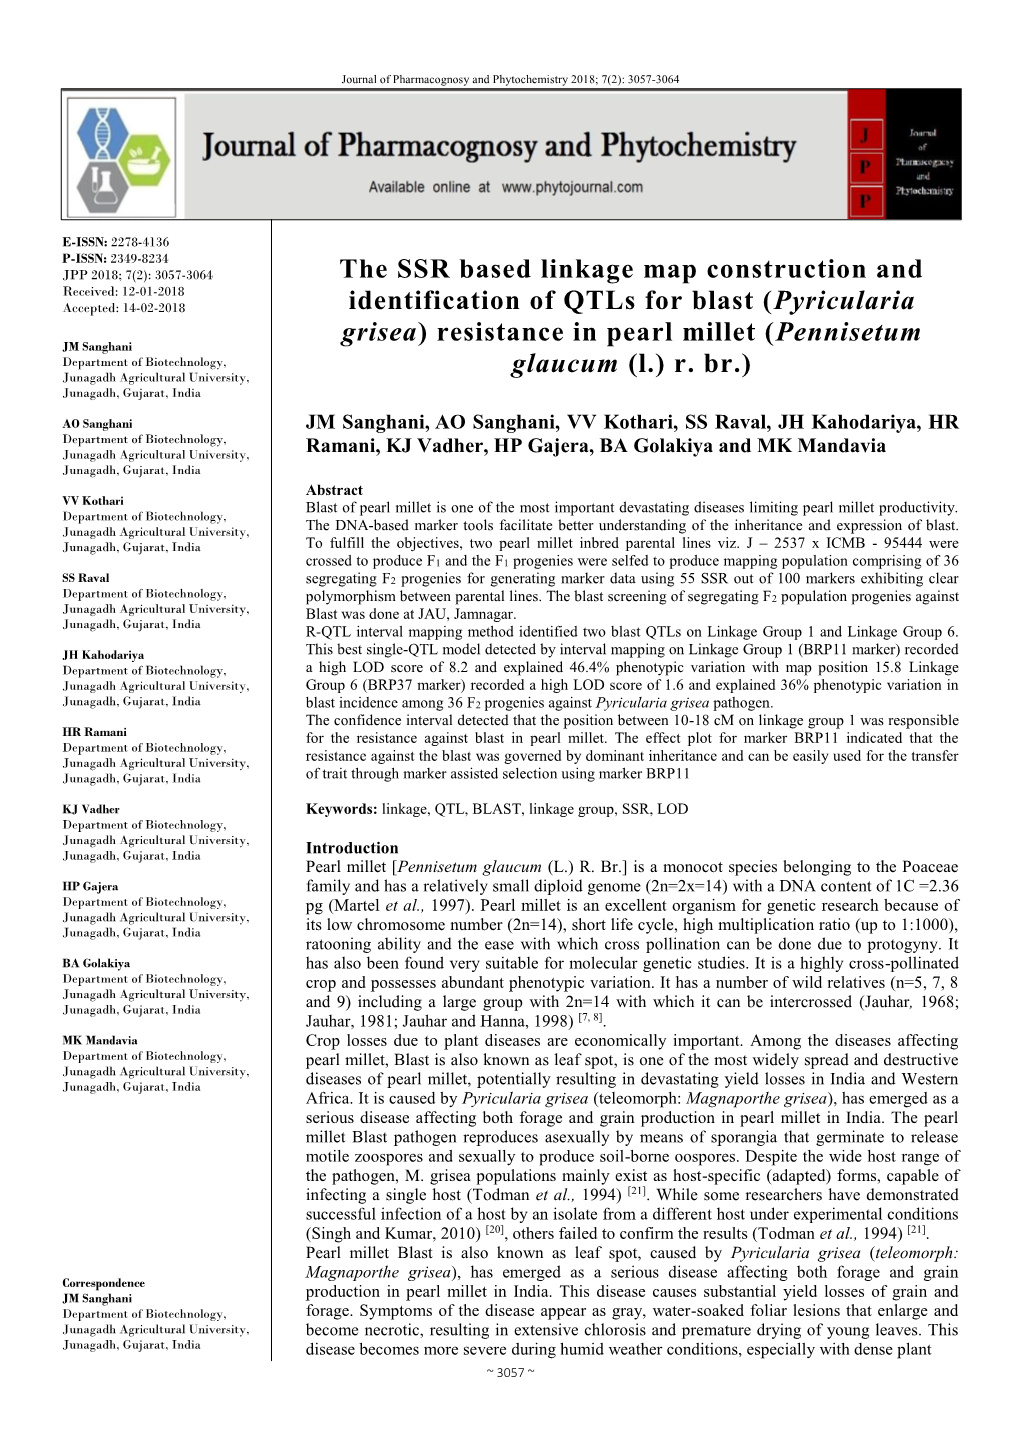 The SSR Based Linkage Map Construction and Identification of Qtls for Blast (Pyricularia Grisea) Resistance in Pearl Millet (Pen